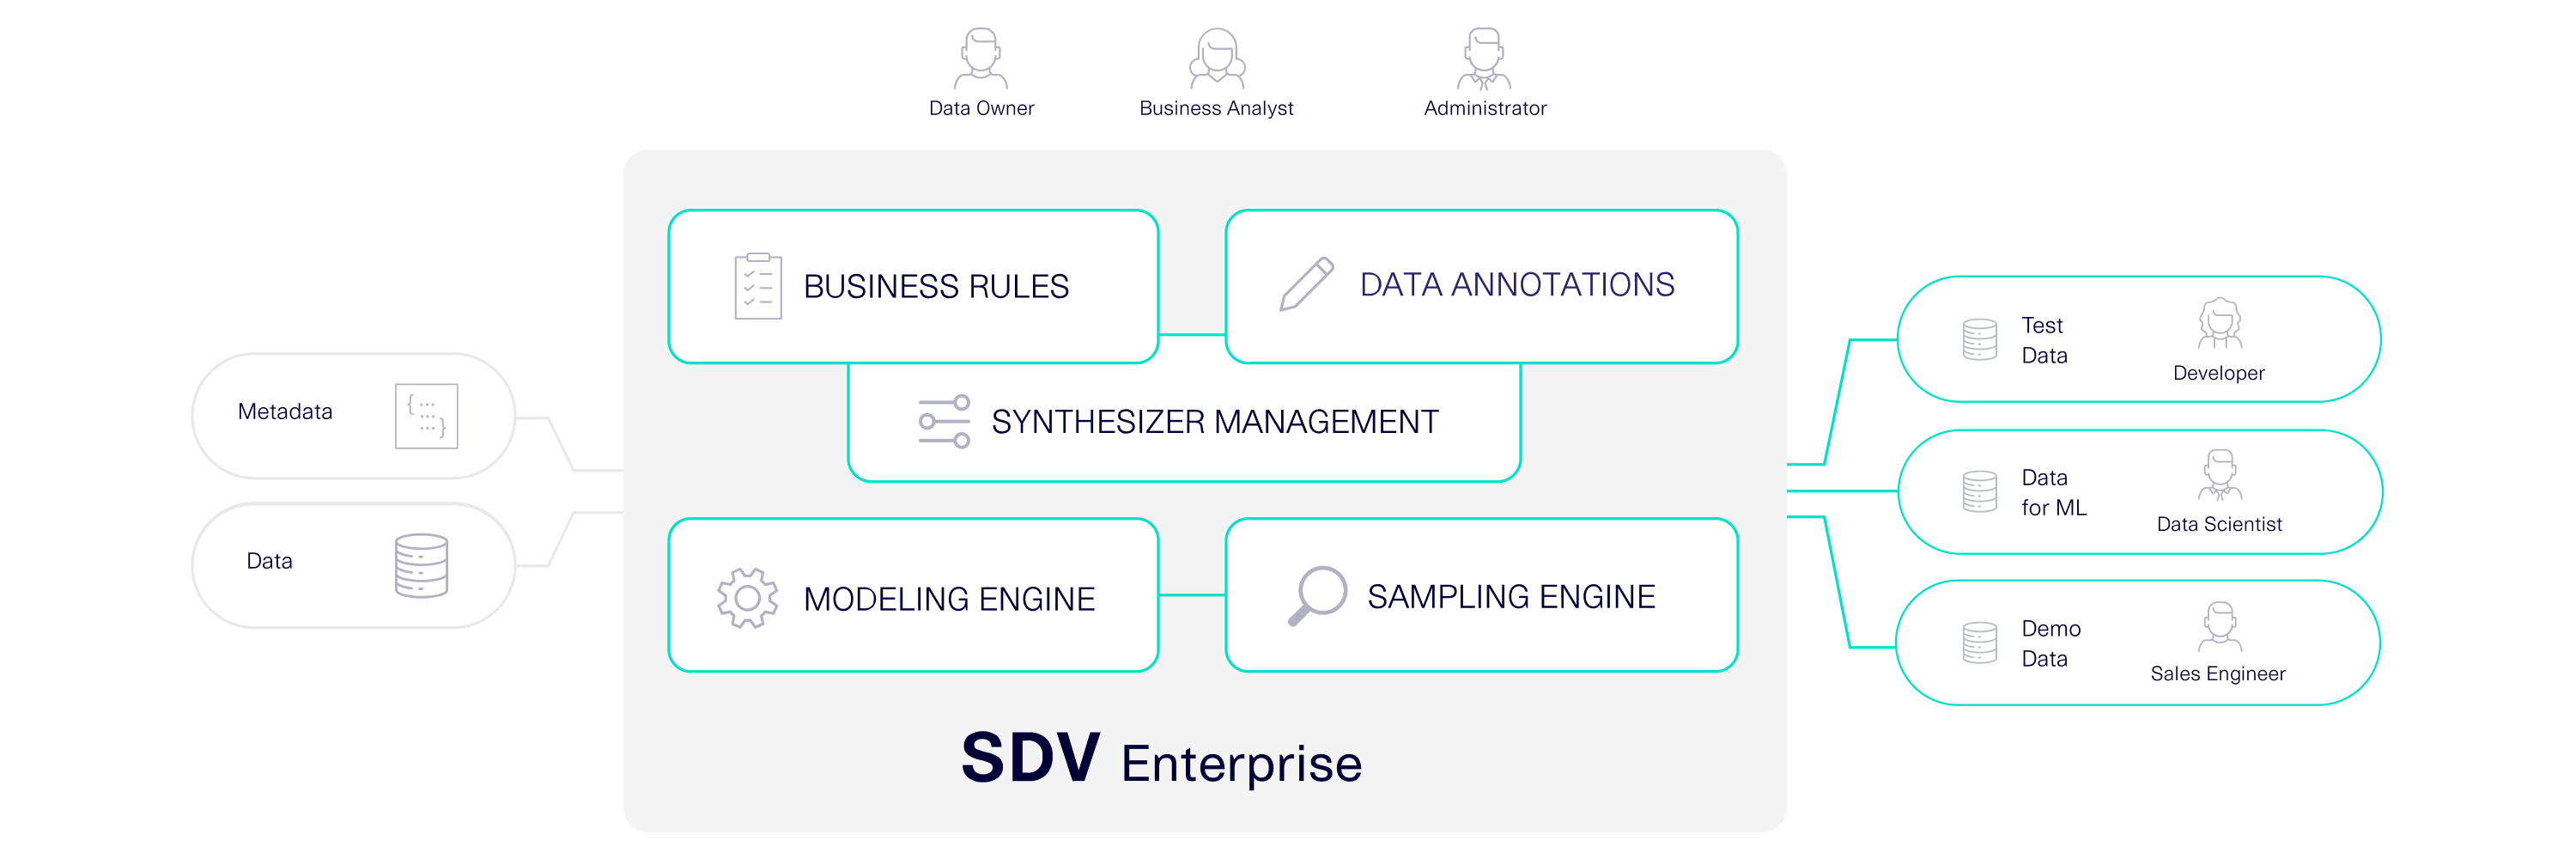 A diagram showing SDV Enterprise Features: Business Rules, Data Annotations, and Synthesizer Management along with Modeling and Sampling Engines.